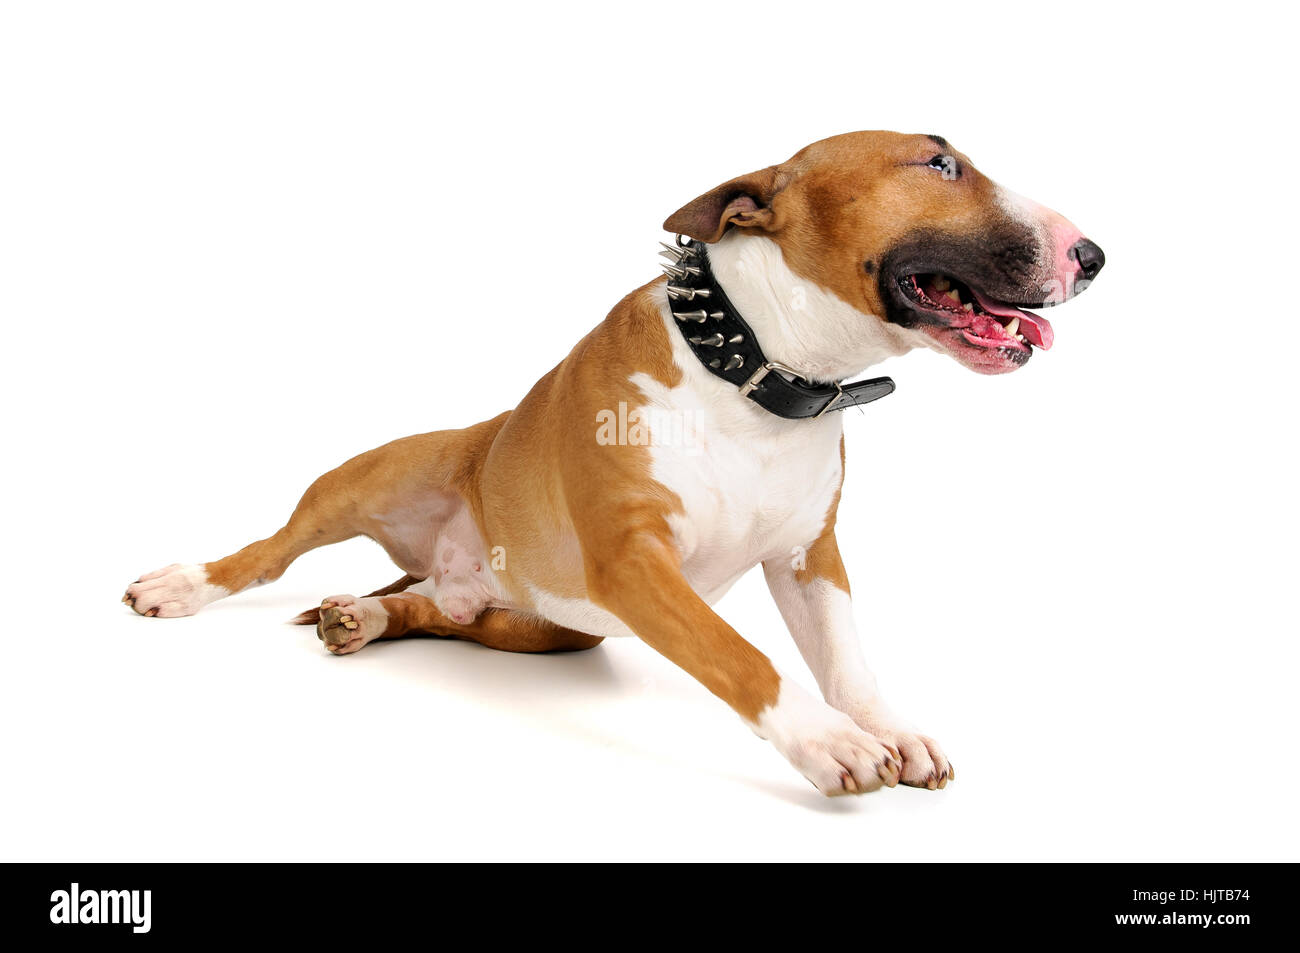 animal, bull, energy, power, electricity, electric power, dog, breed, canine, Stock Photo